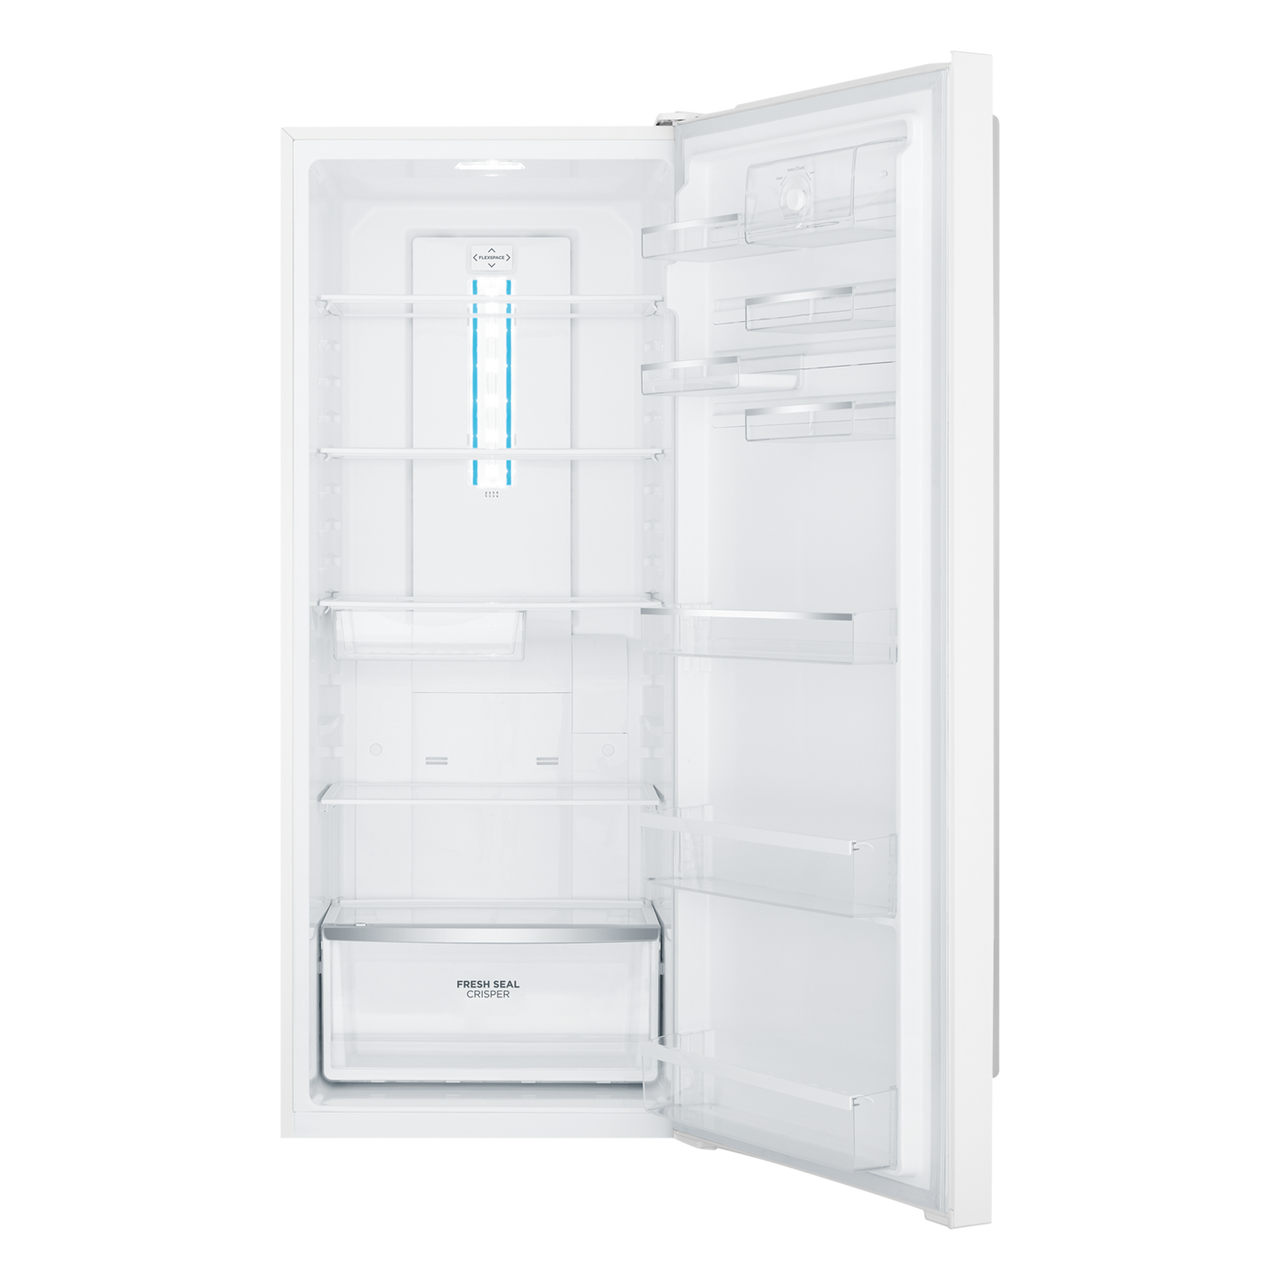 WRB5004WC - 501L Single Door All Fridge - Classic White, Right Hinge (Limited stock)